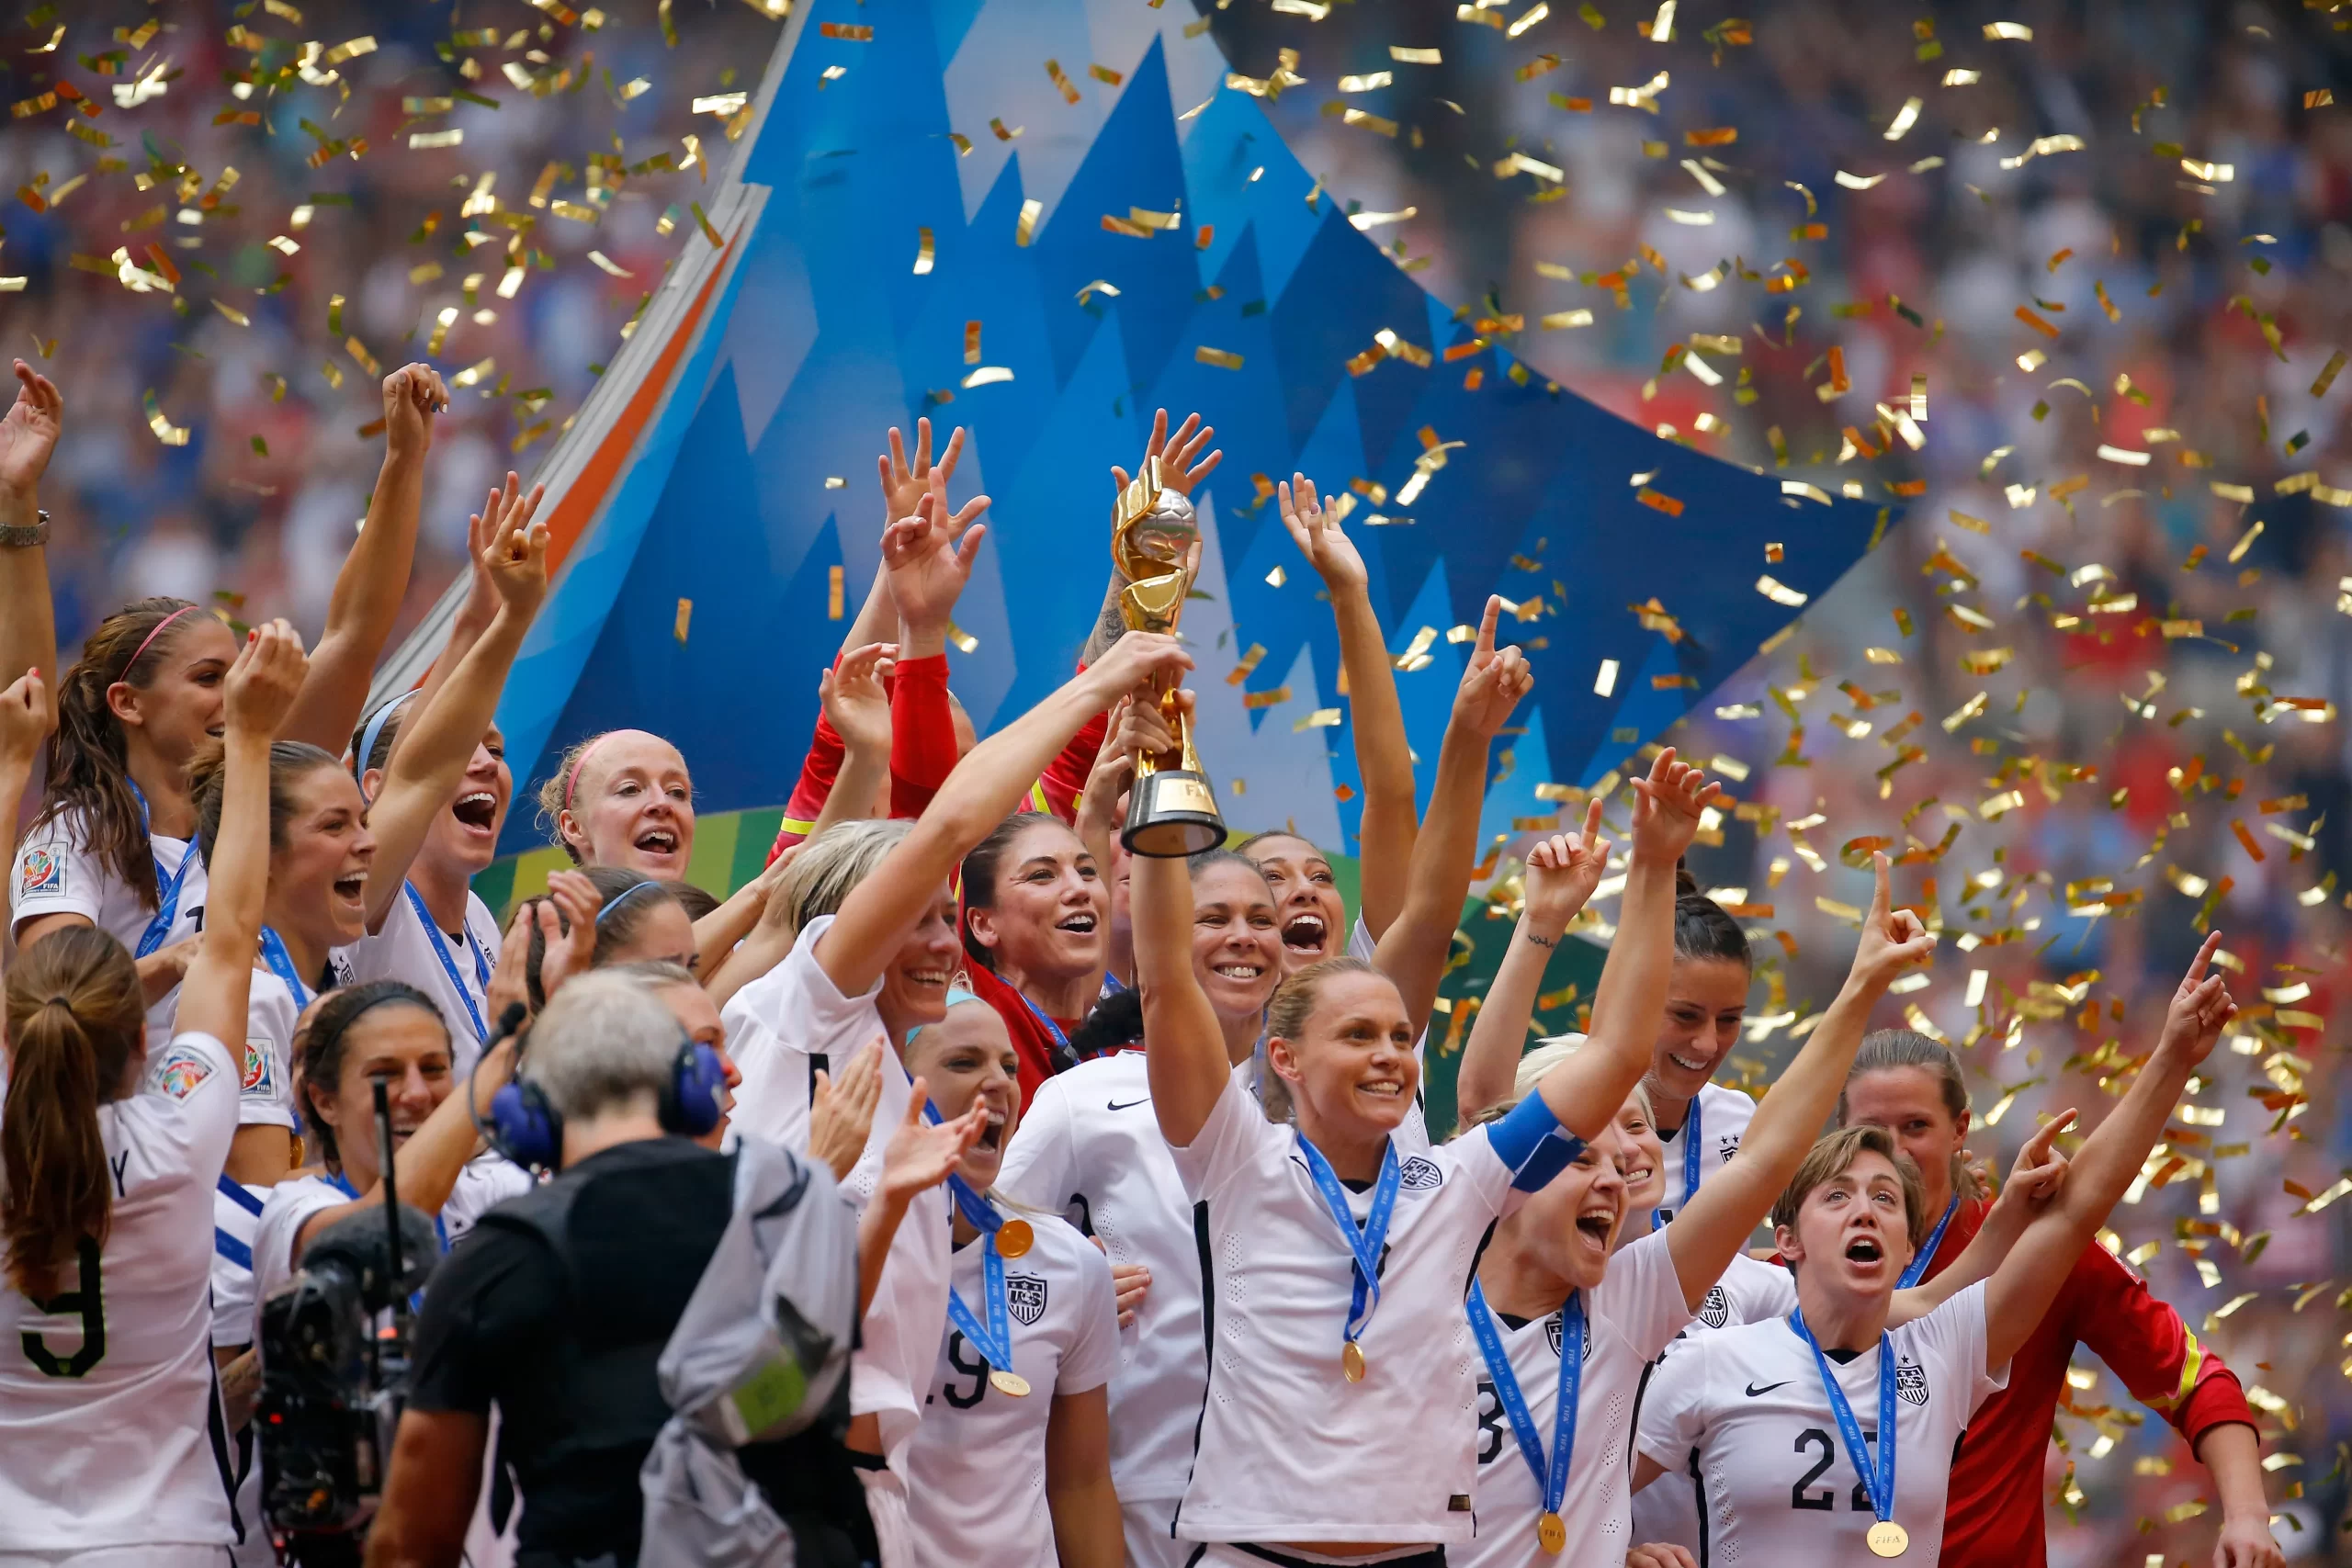 "Women's World Cup: A Platform for Global Female Footballers"